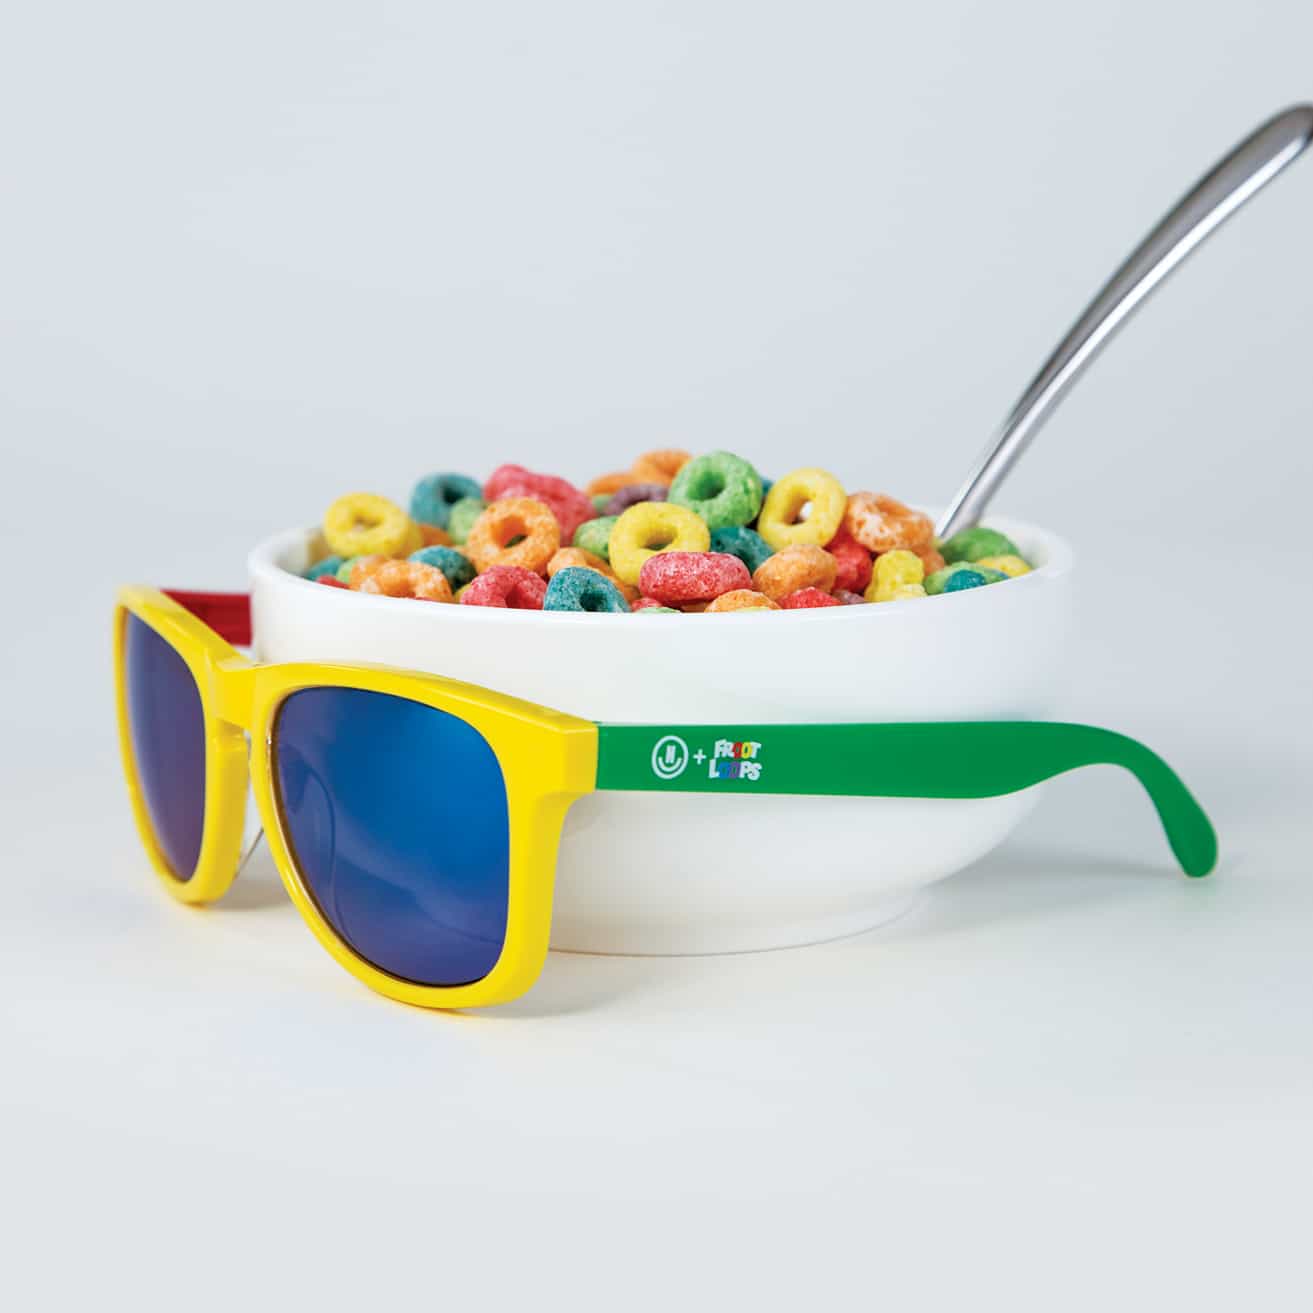 Neff Sunglasses with bowl of fruit loops